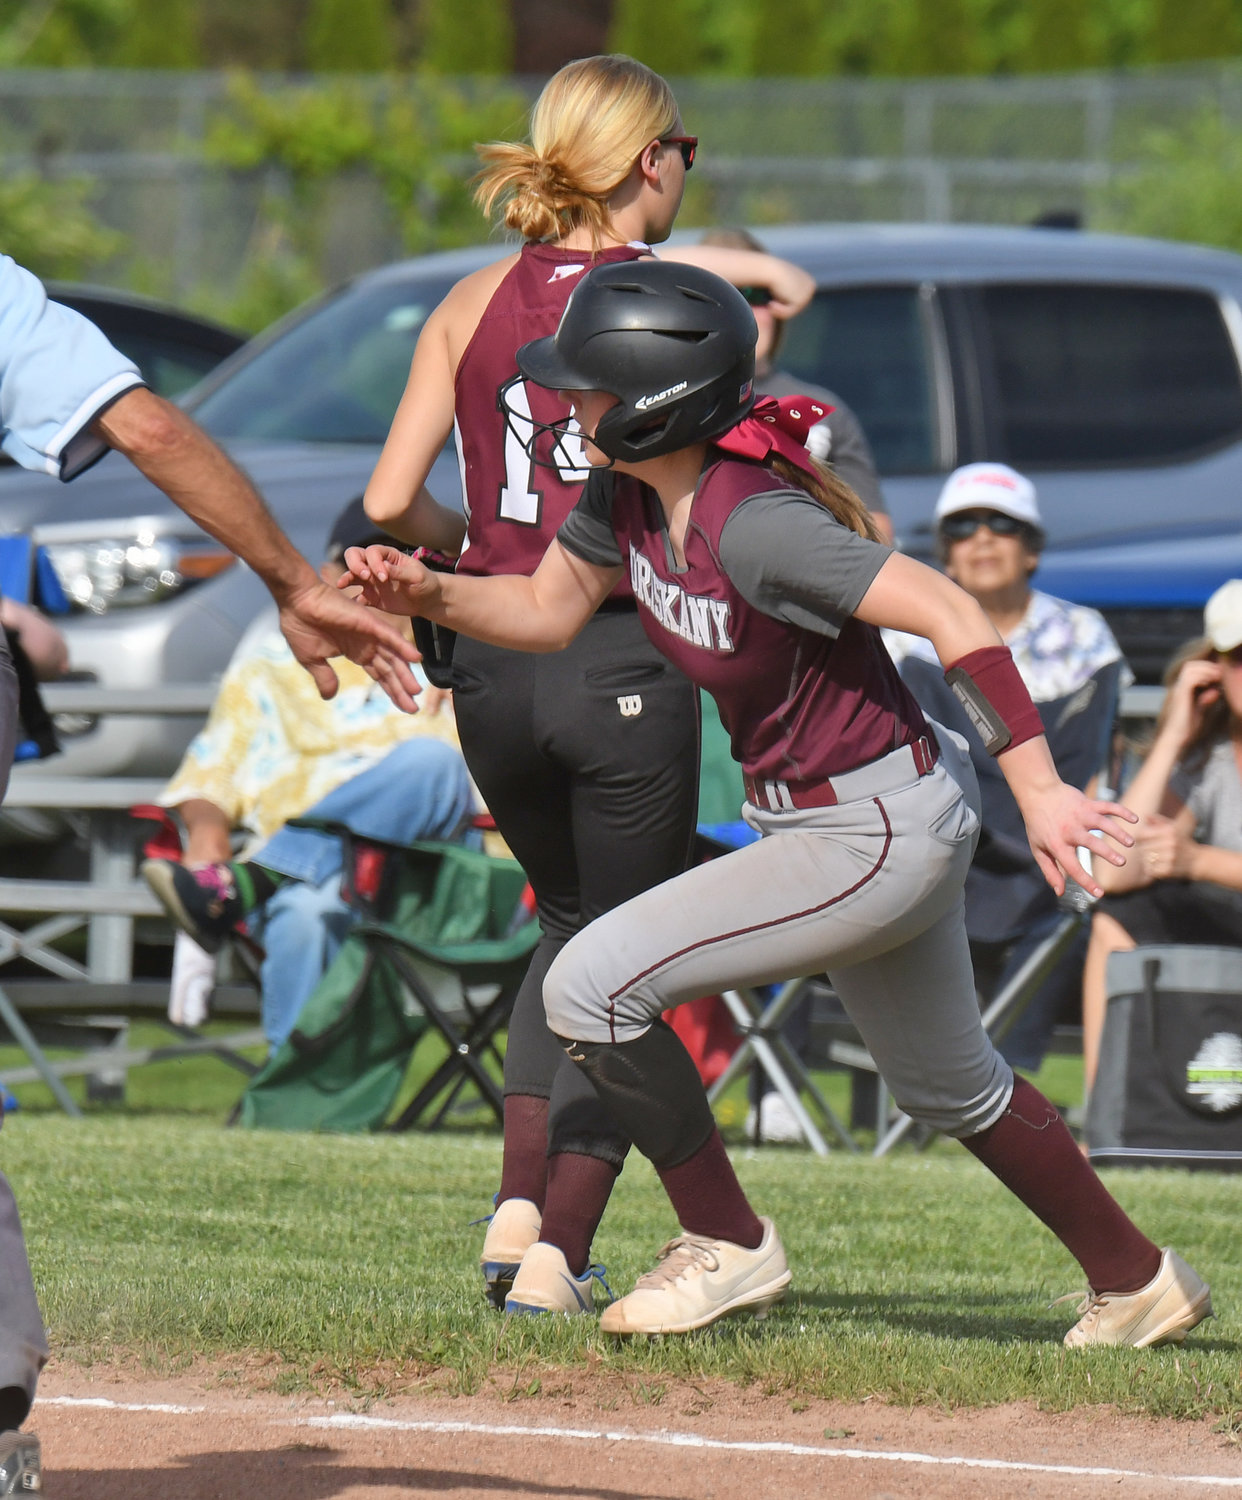 Kaelyn Buhler of Oriskany turns to run to second base after the ball was overthrown to first base. She scored later in the inning, which proved to be the game-winning run in the team's 7-4 win over Sackets Habor in the Section III Class D quarterfinals.